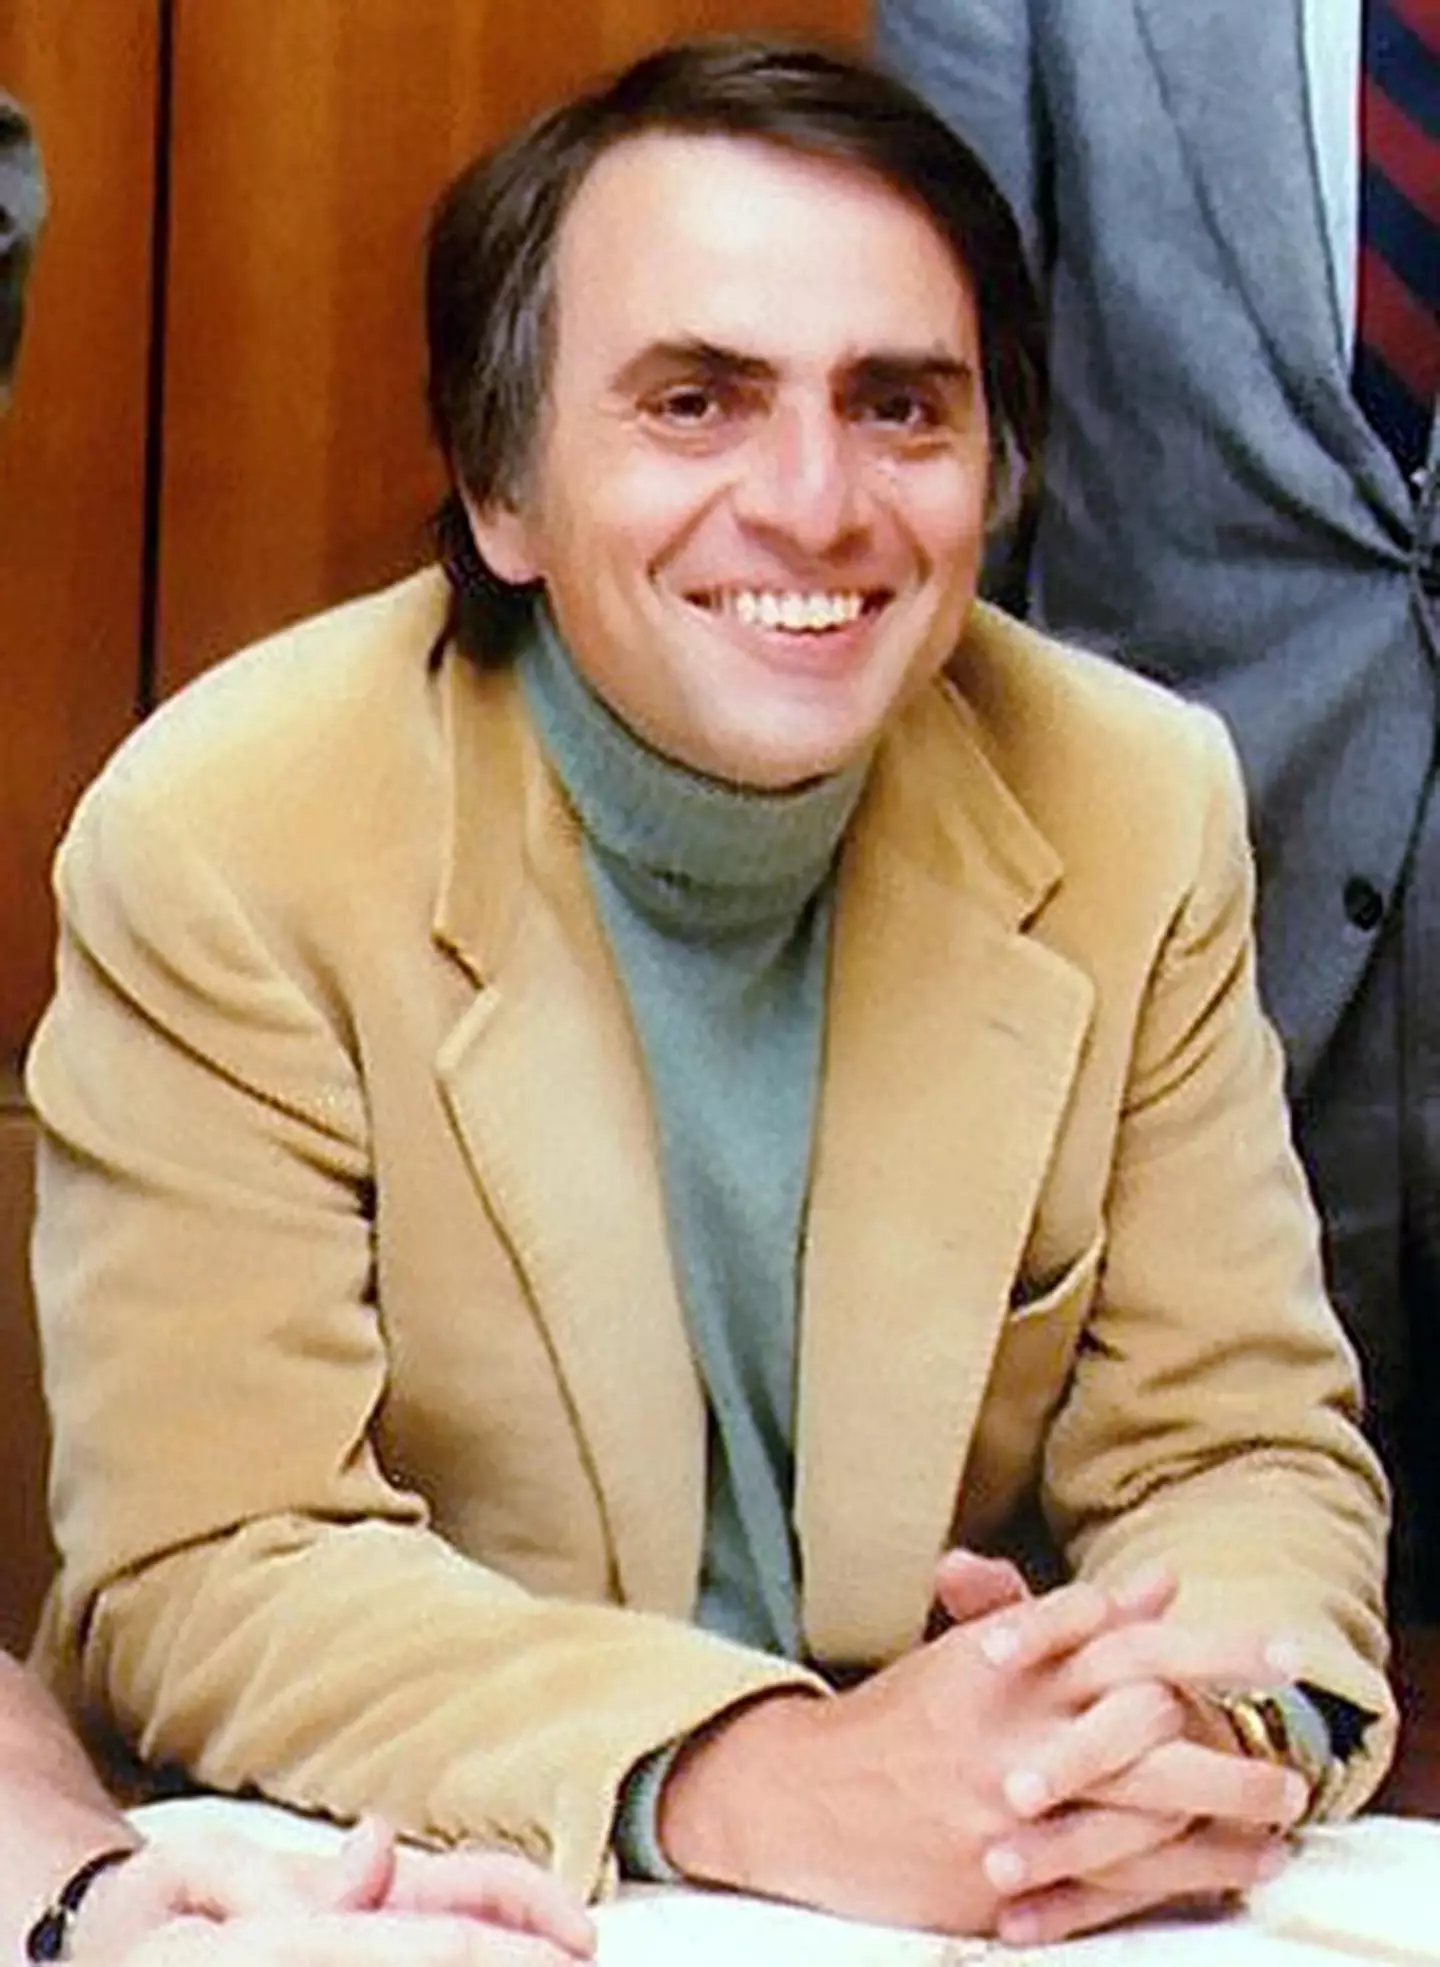 Carl Sagan was a well-known scientist before he died in the 1990s.